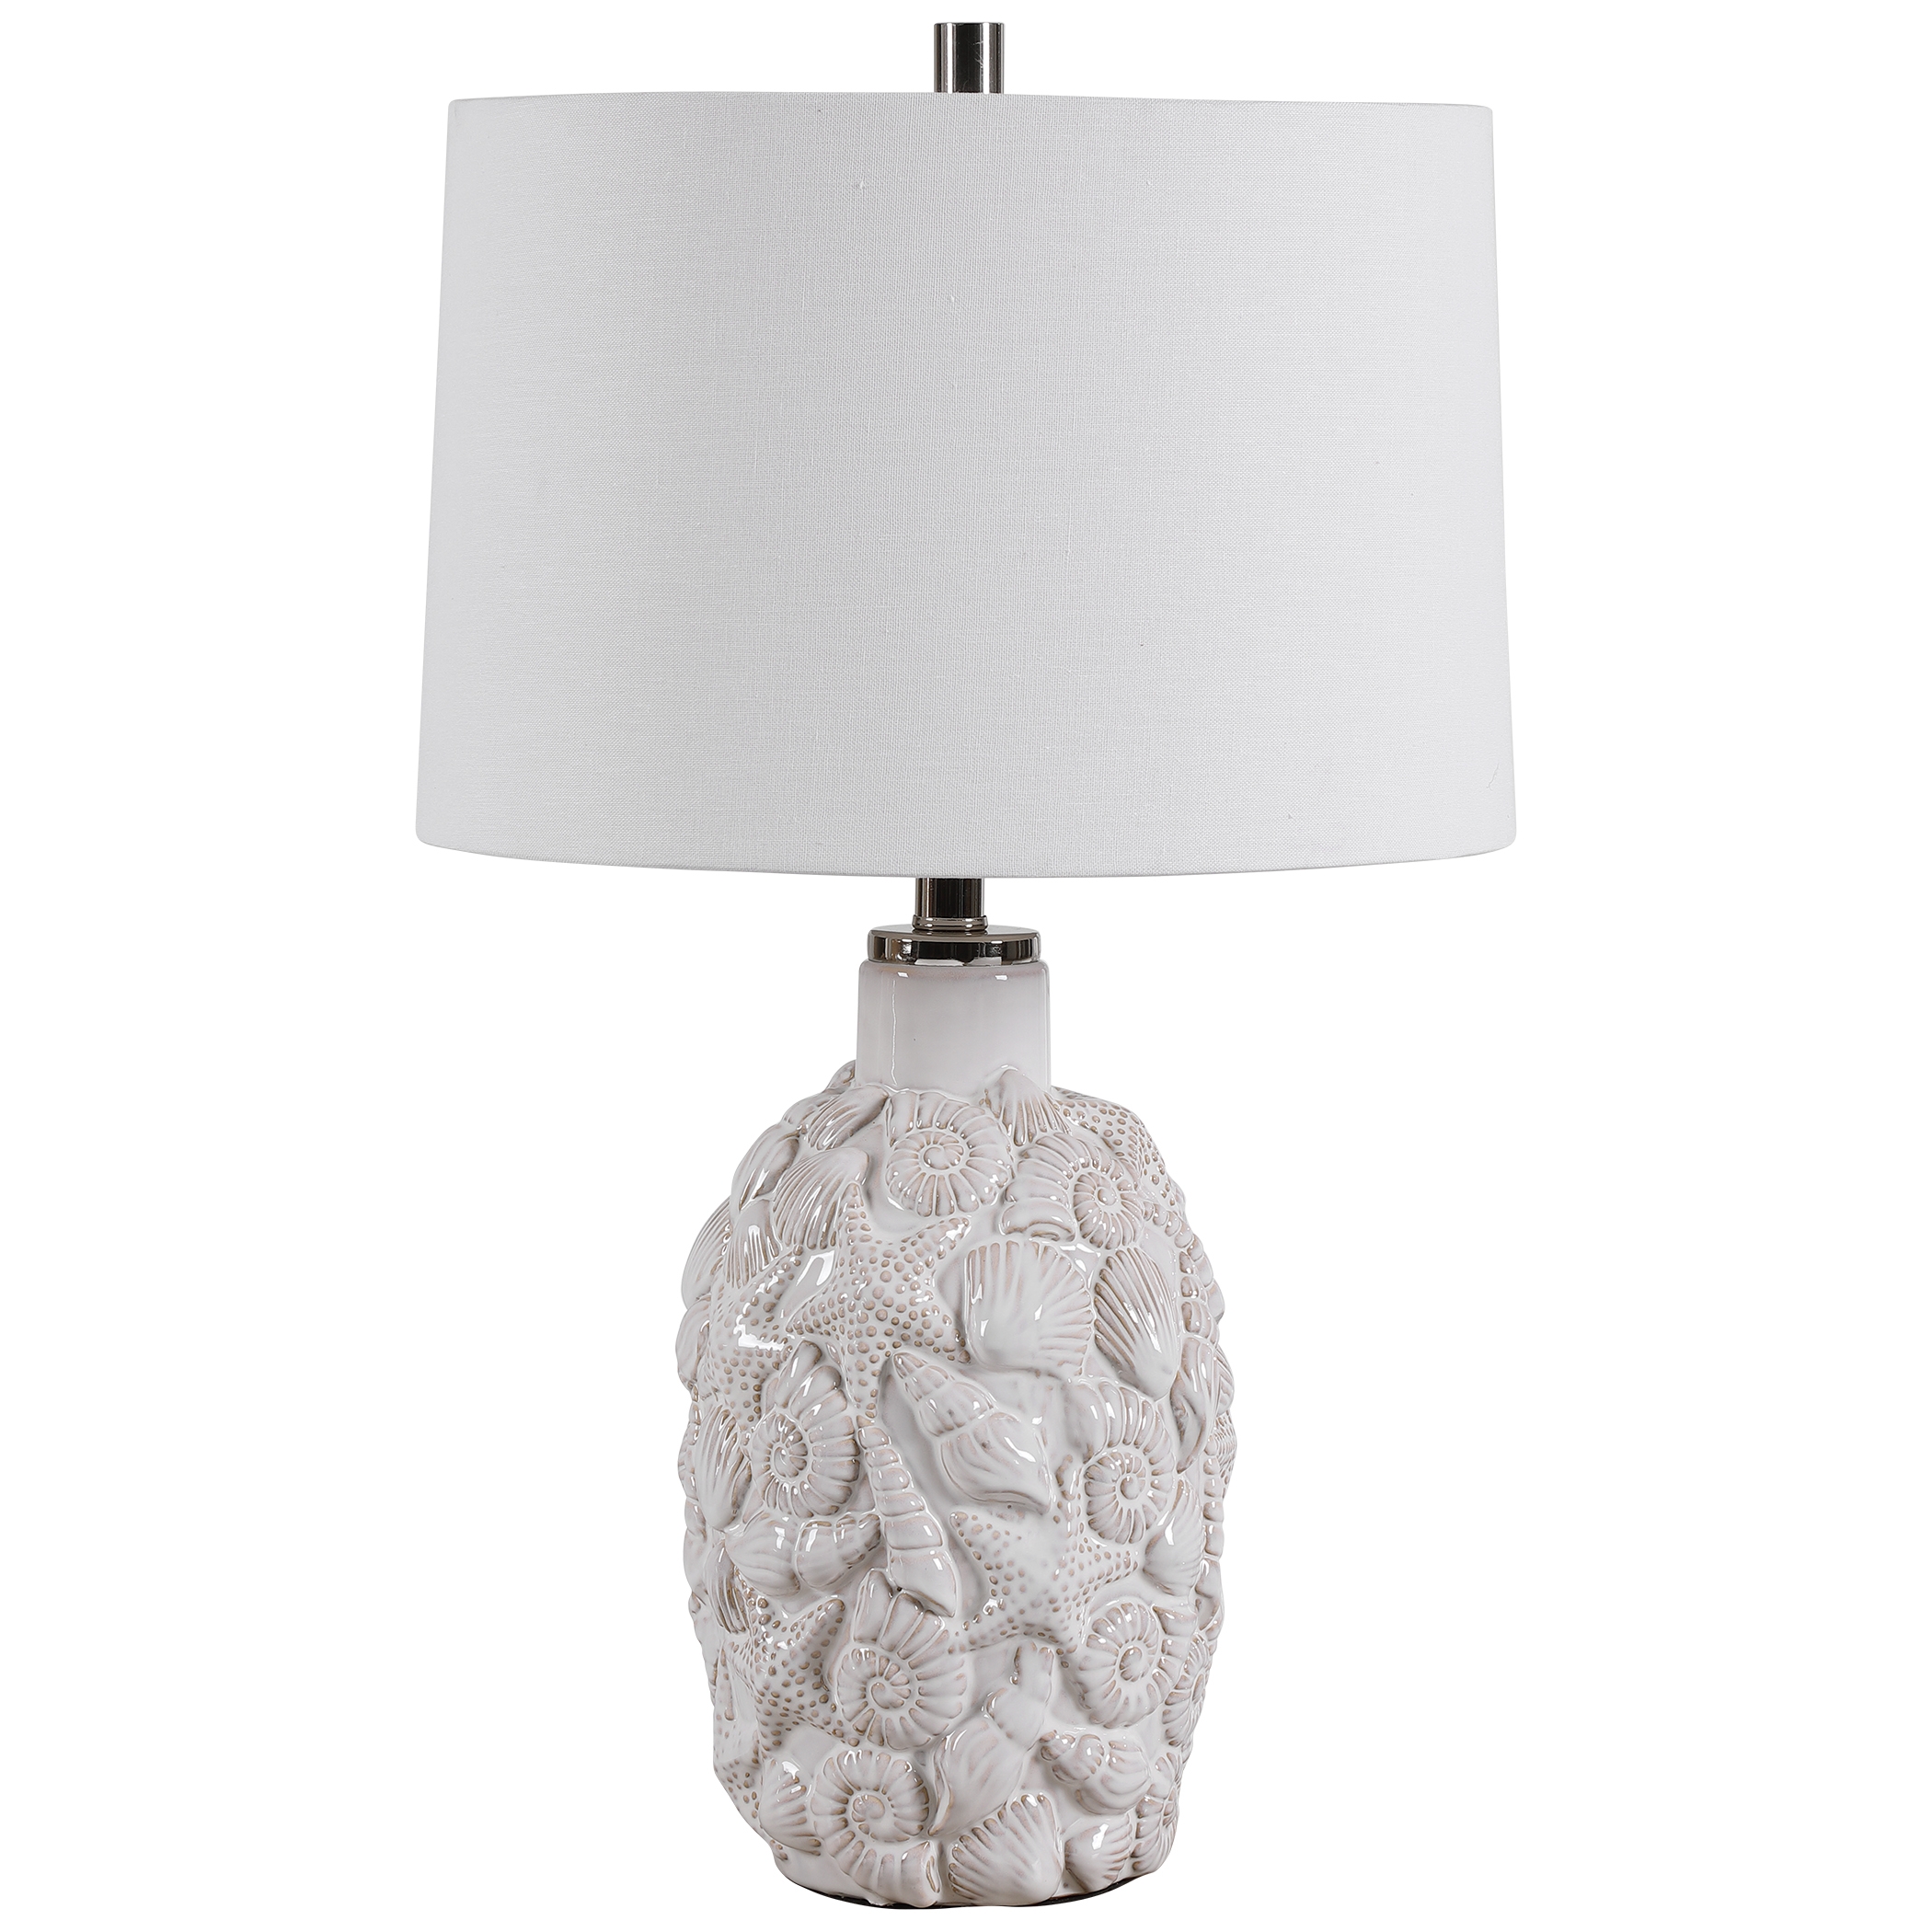 TABLE LAMP - Image 2